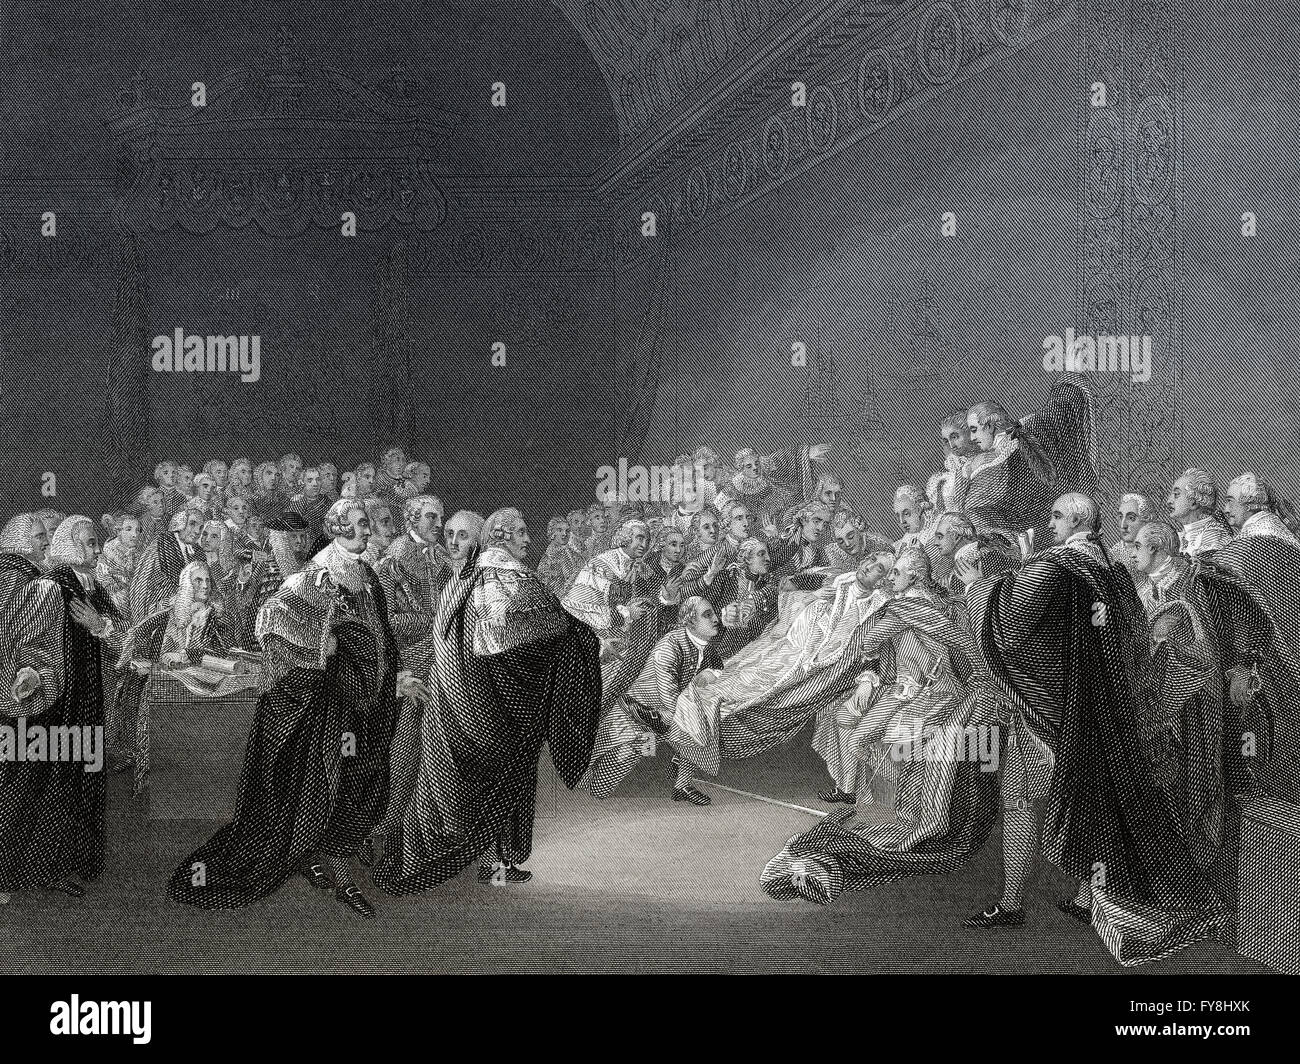 The Death of William Pitt, 1st Earl of Chatham, 1708-1778, Prime Minister of Great Britain, in the House of Lords, 7 April 1778 Stock Photo